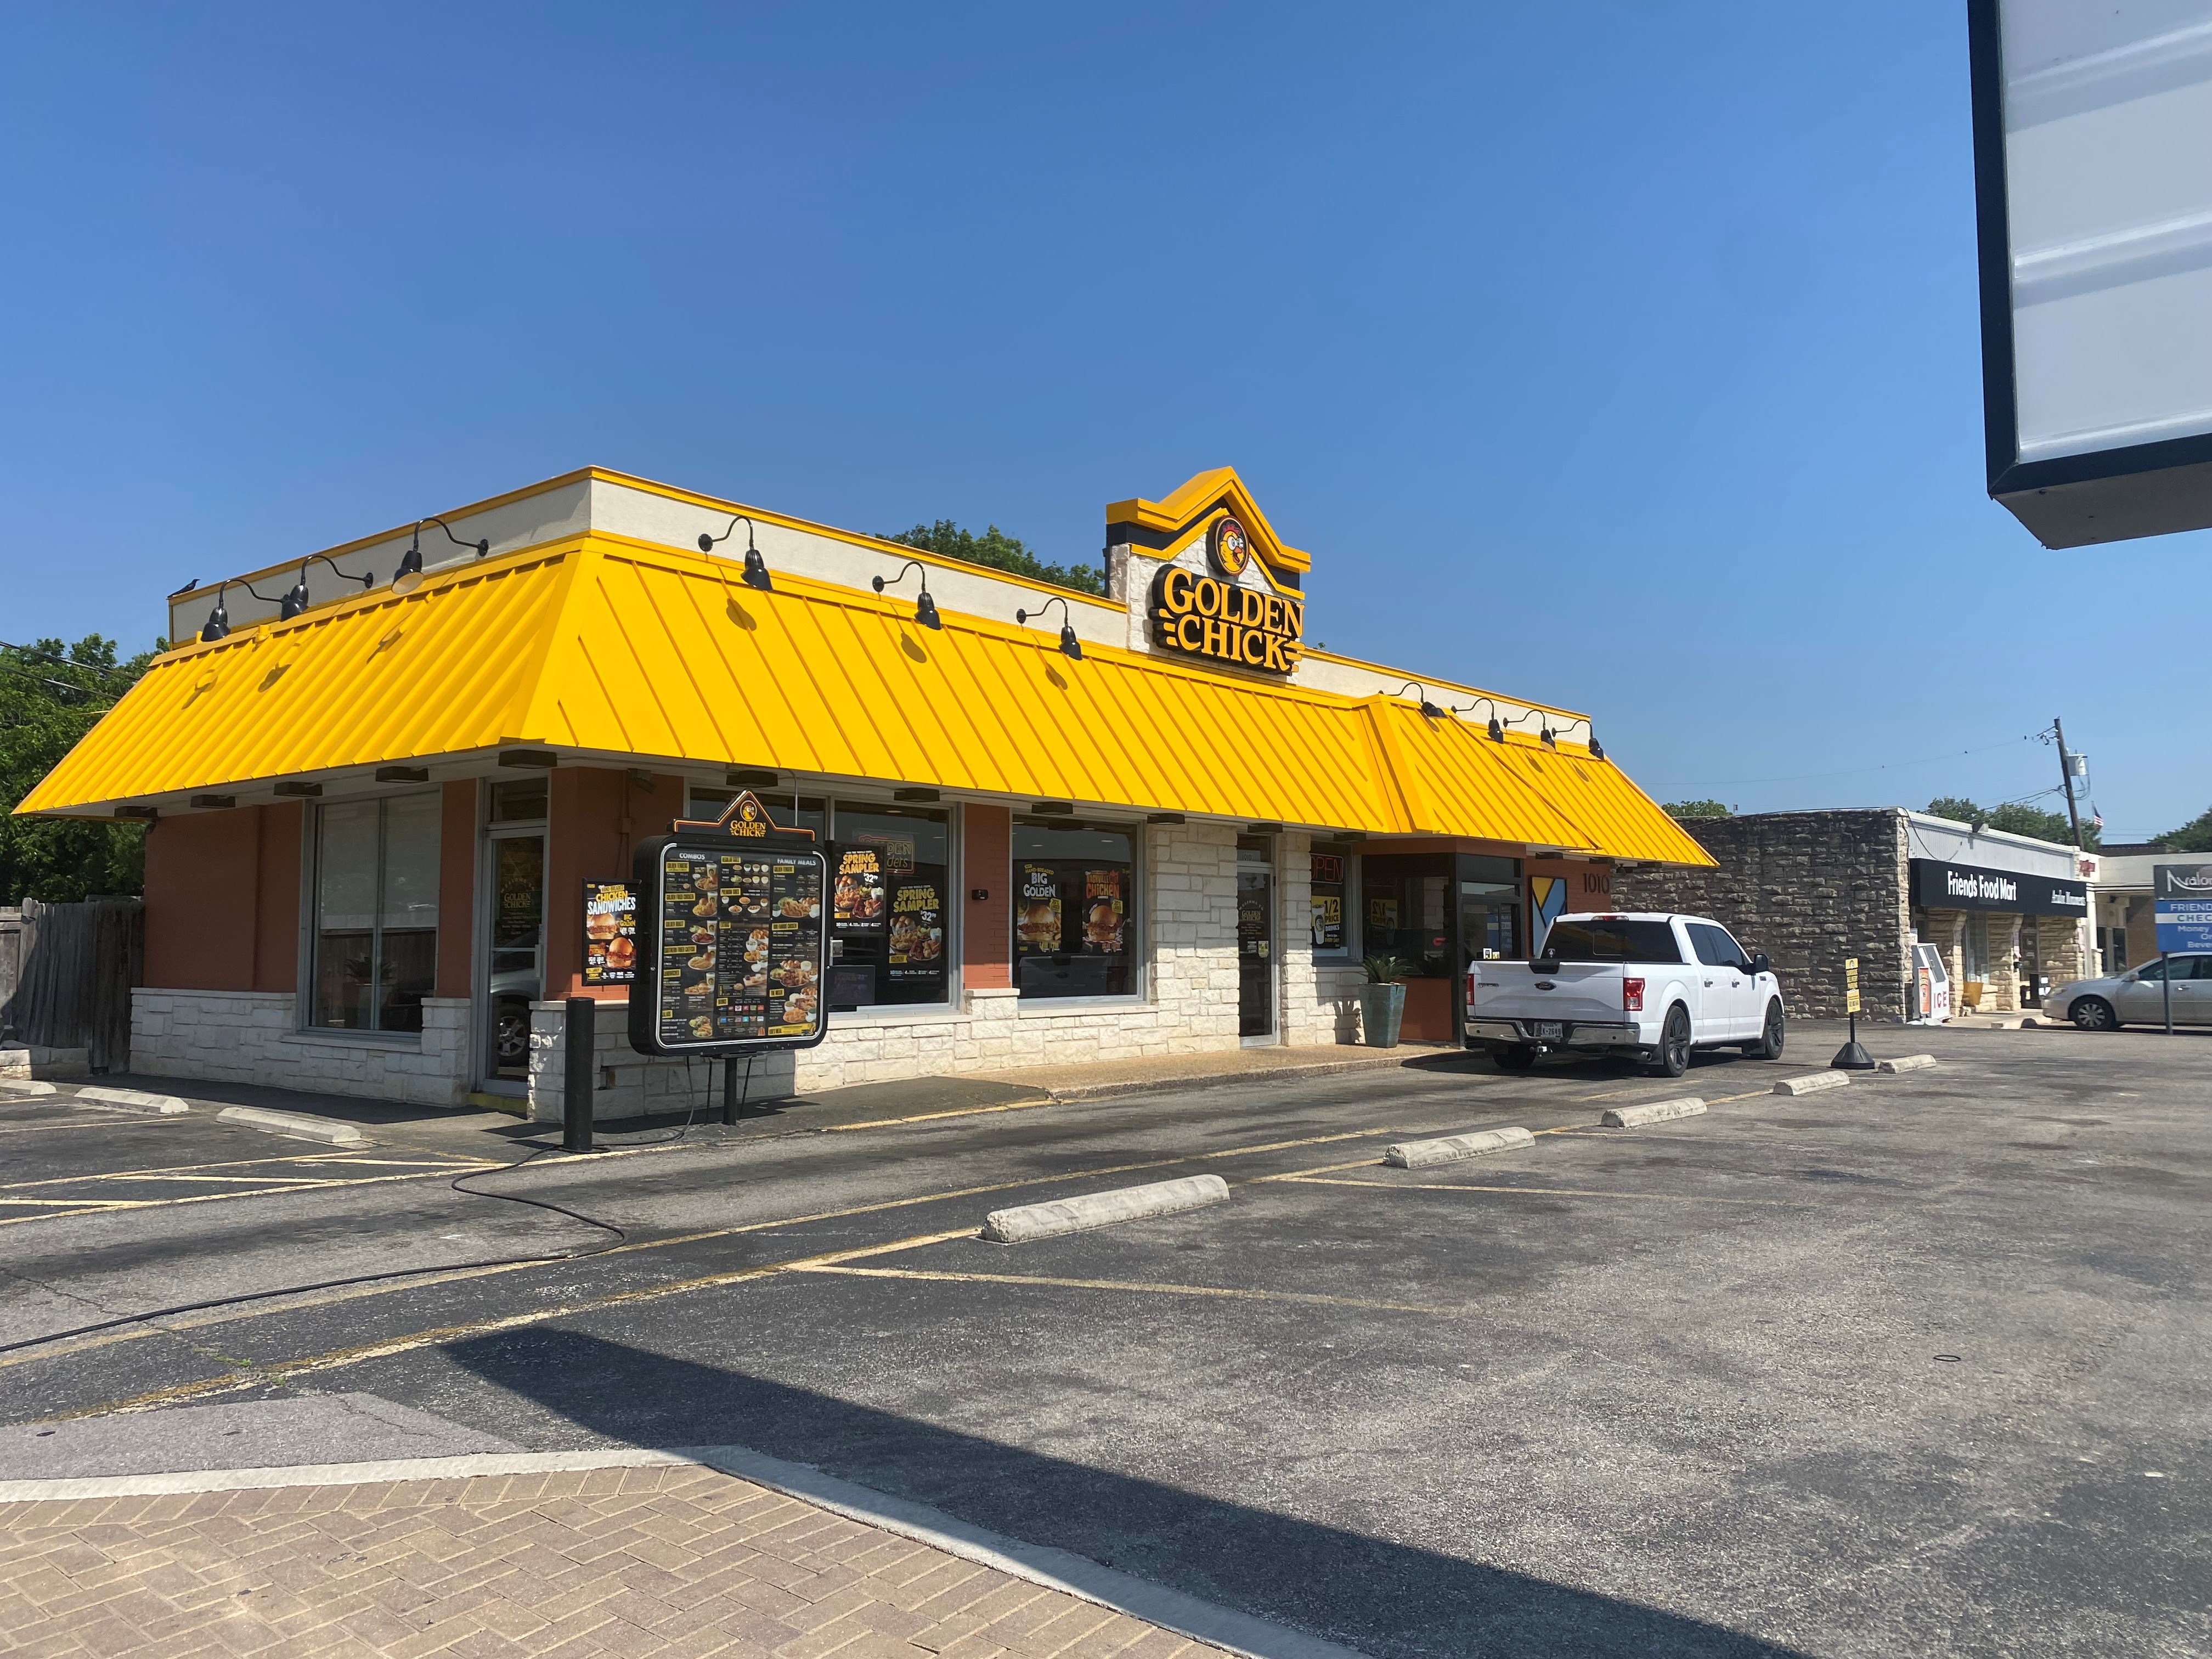 Golden Chick storefront.  Your local Golden Chick fast food restaurant in Georgetown, Texas